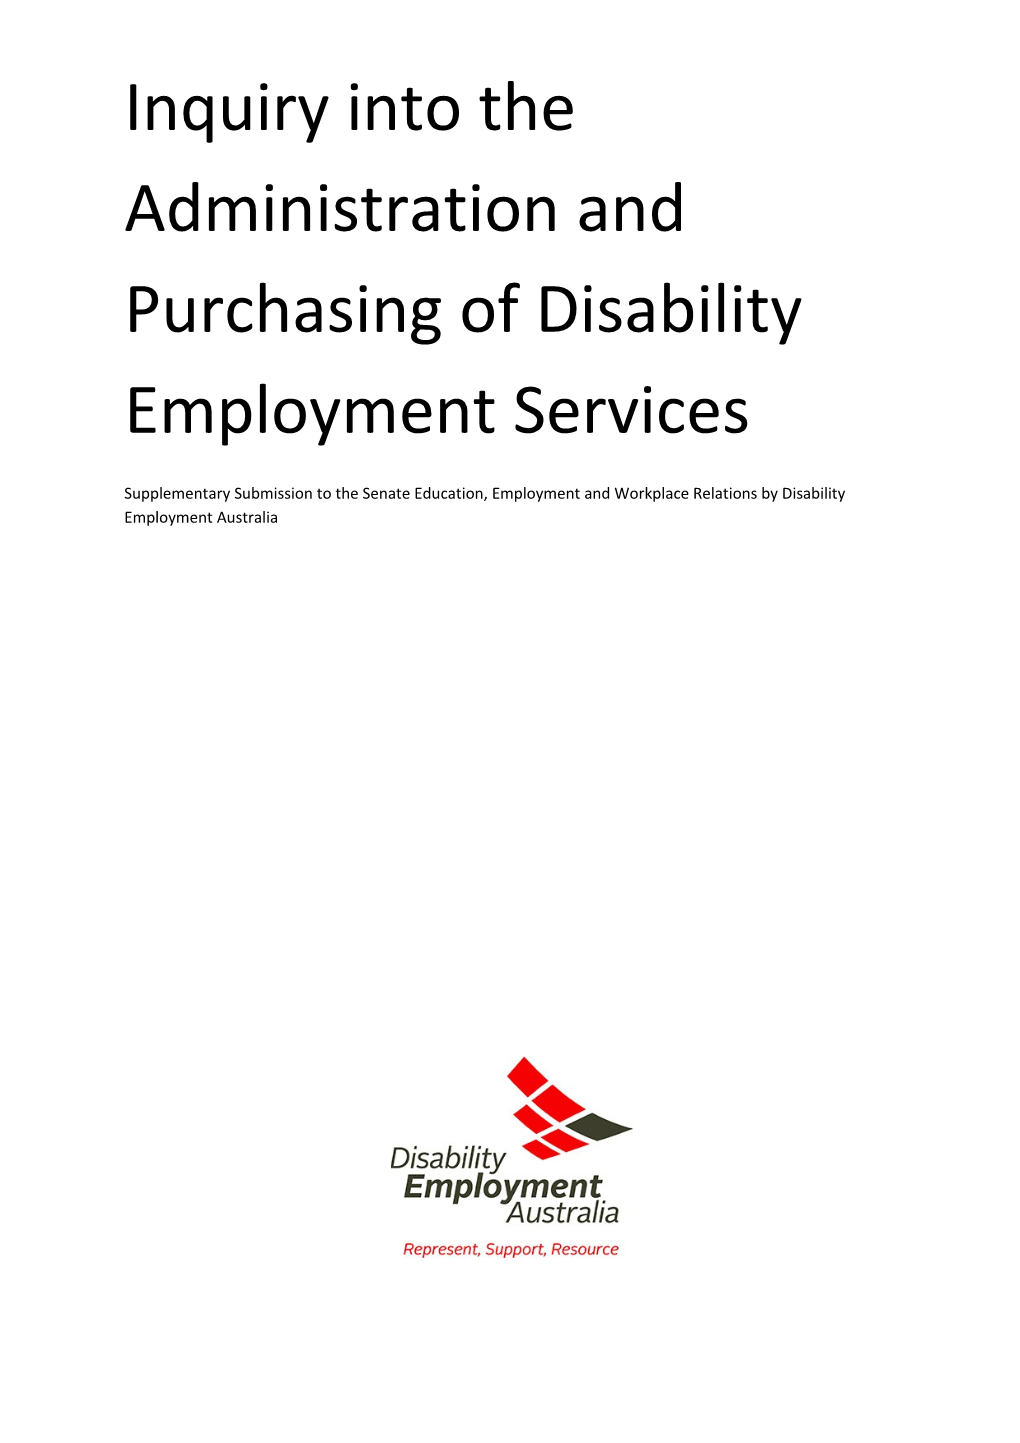 Senate Inquiry Into the Administration and Purchasing of Disability Employment Services